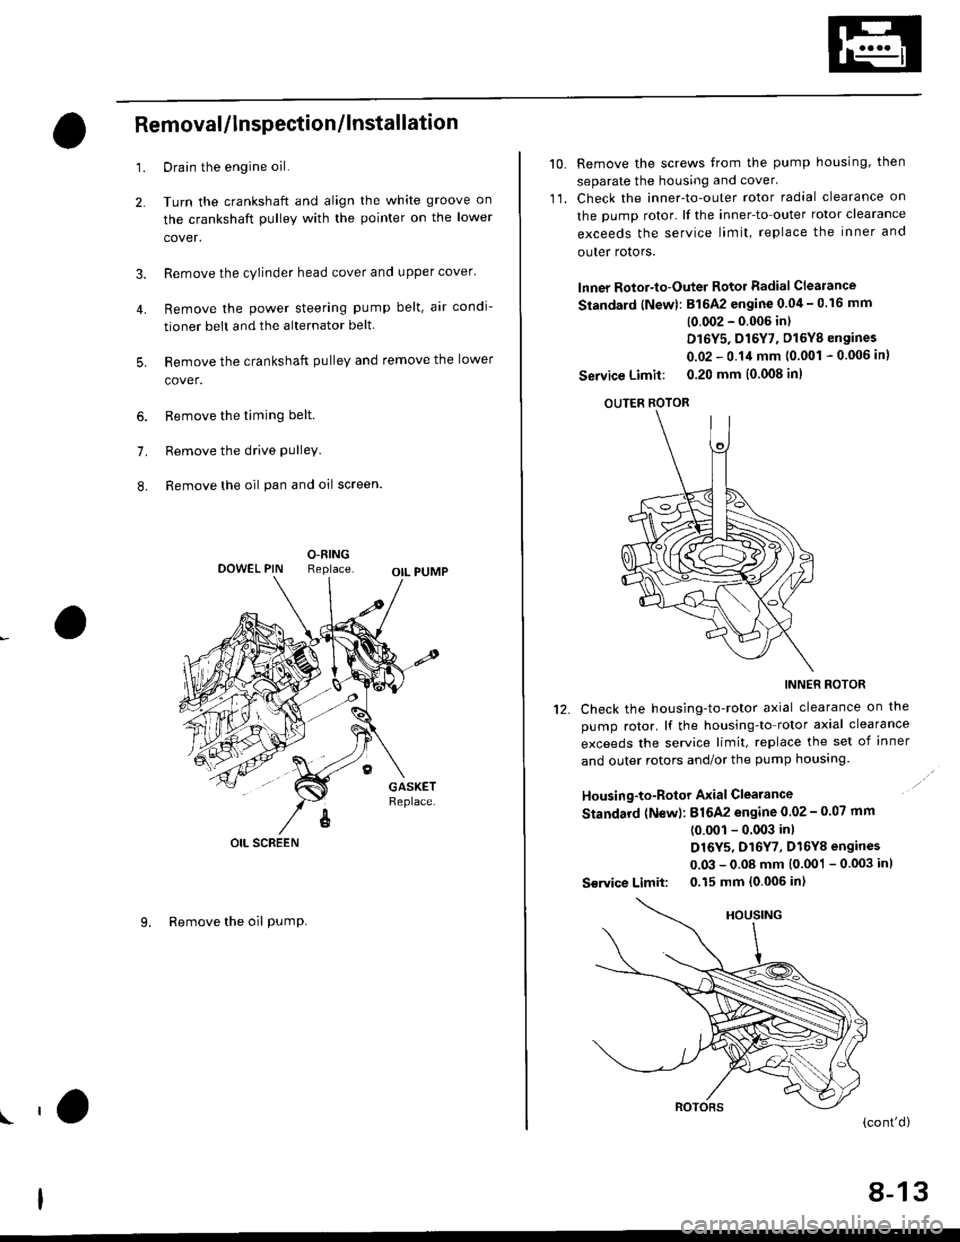 HONDA CIVIC 2000 6.G User Guide 4.
Removal/lnspection/lnstallation
2.
3.
1.
5.
6.
1.
8.
Drain the engine oil.
Turn the crankshaft and align the white groove on
the crankshaft pulley with the pointer on the lower
cover.
Remove the cy